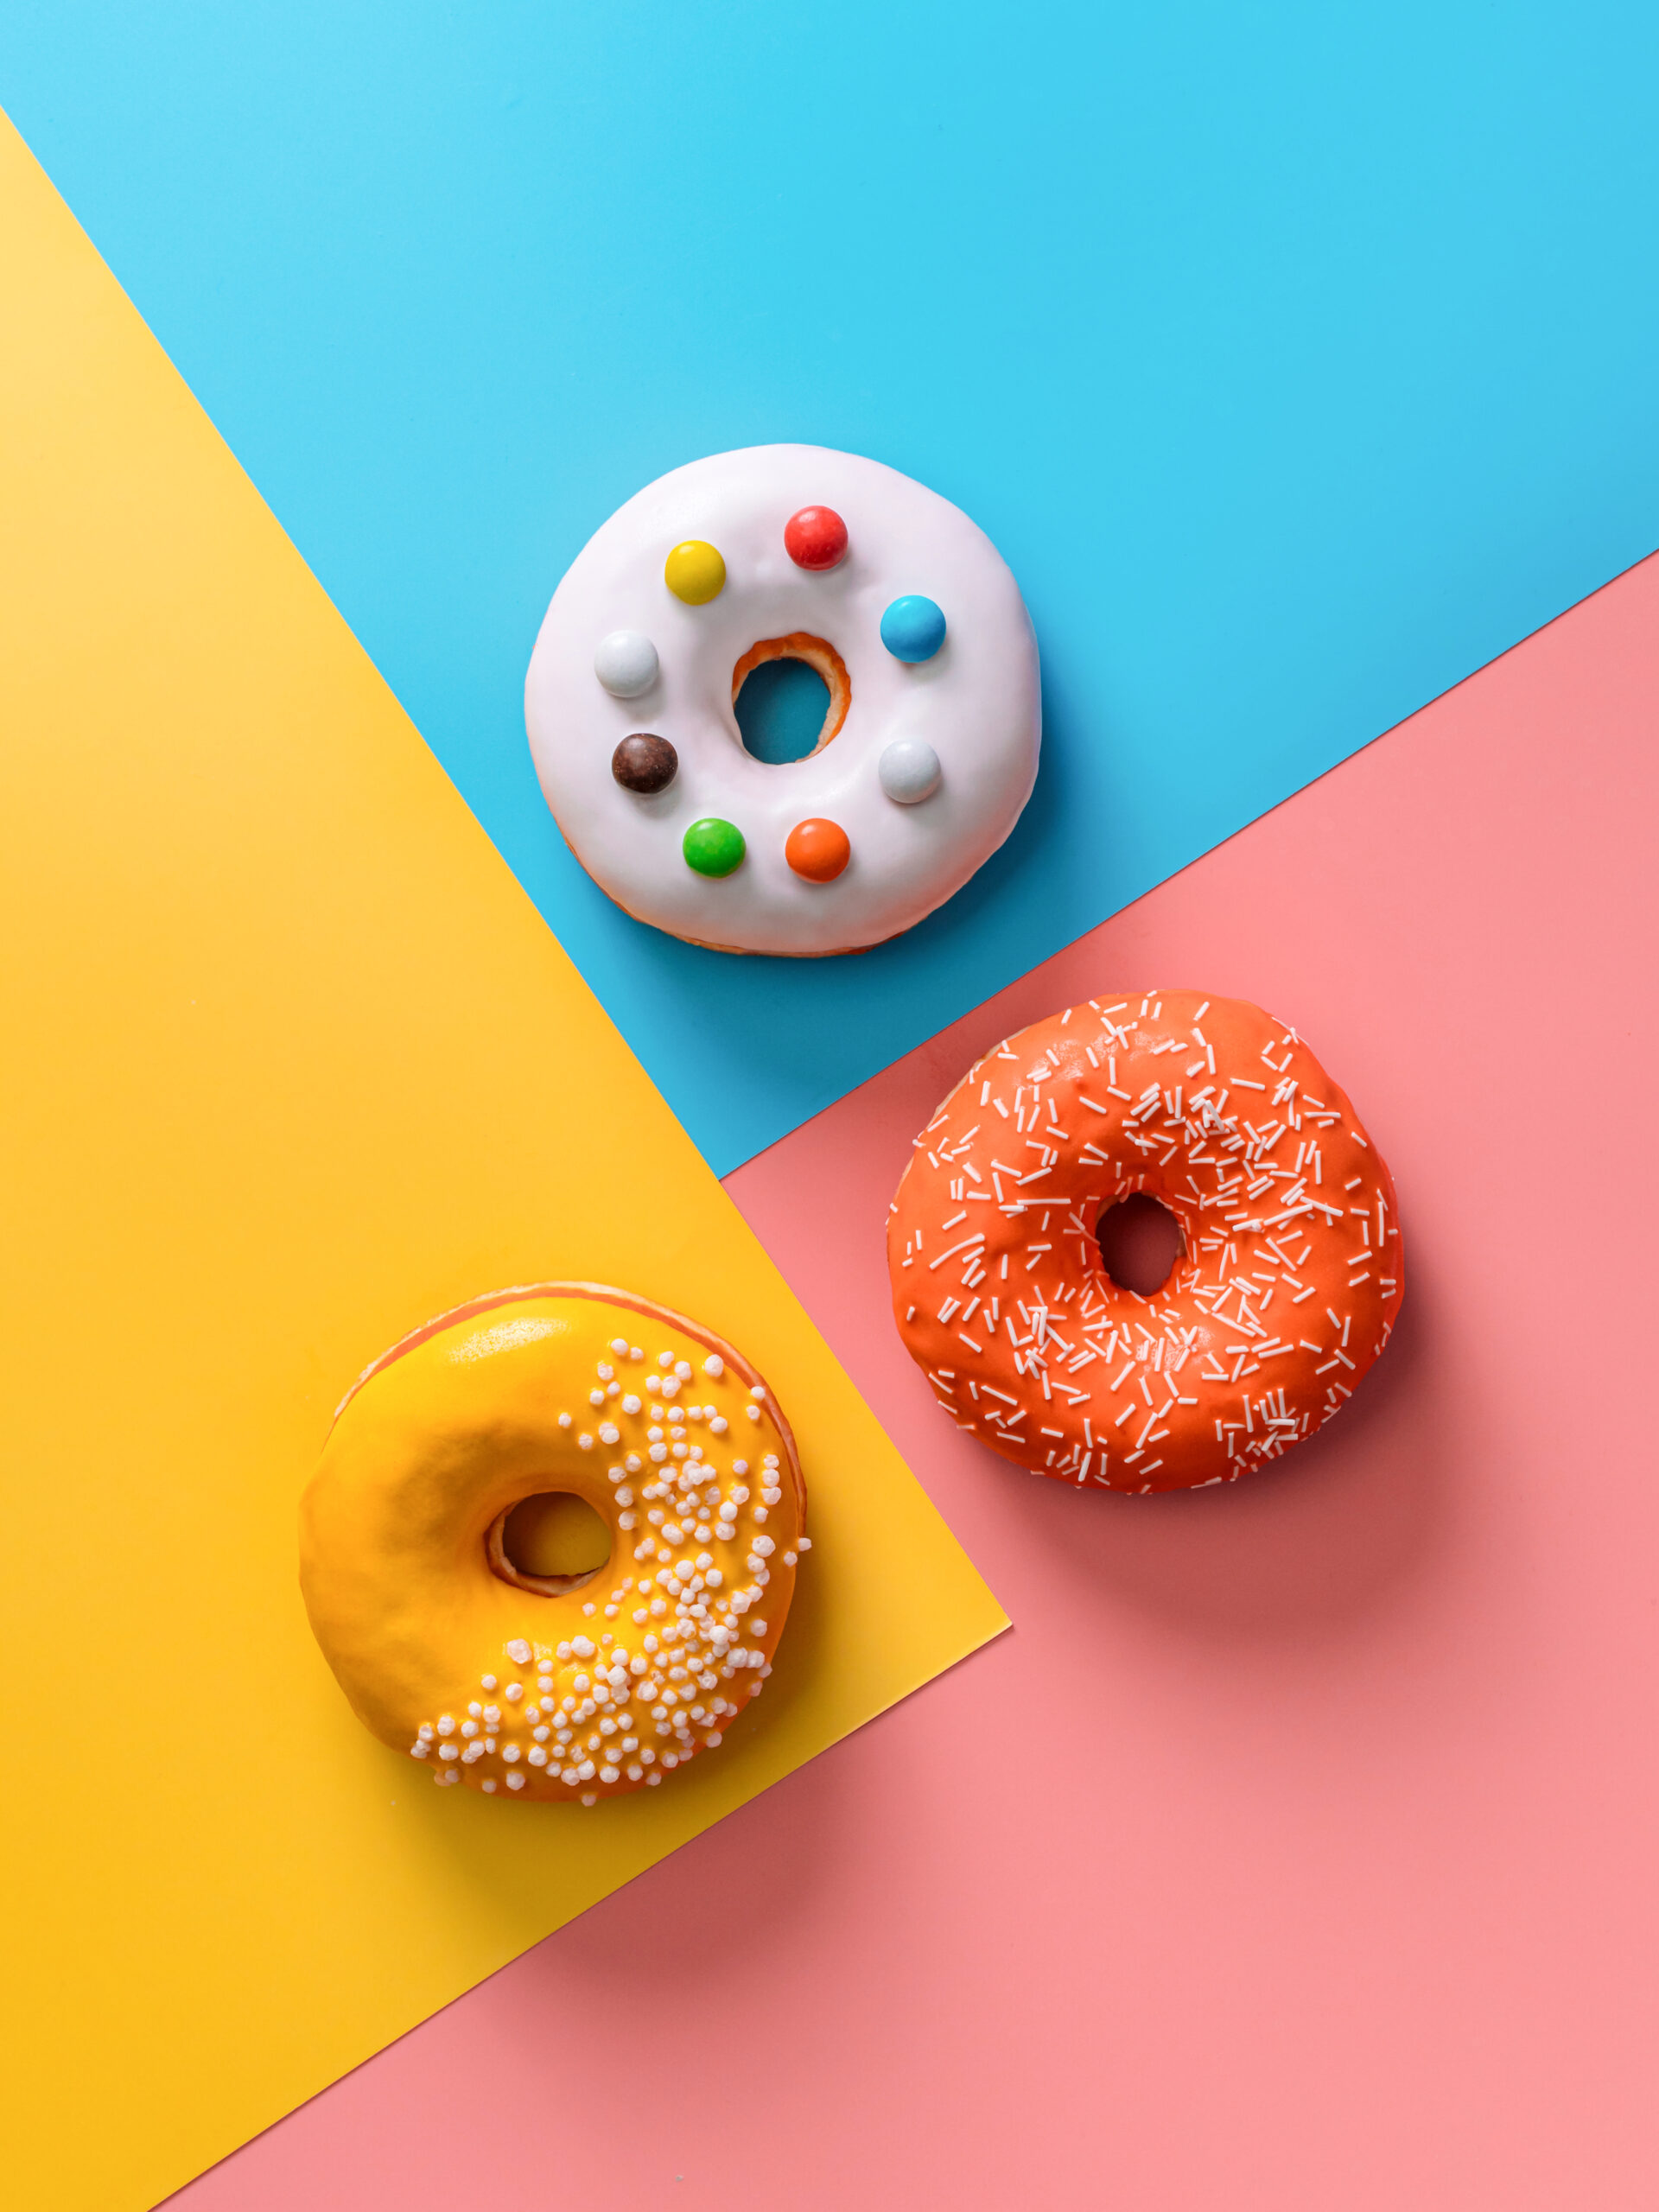 Glazed donuts on colorful background.